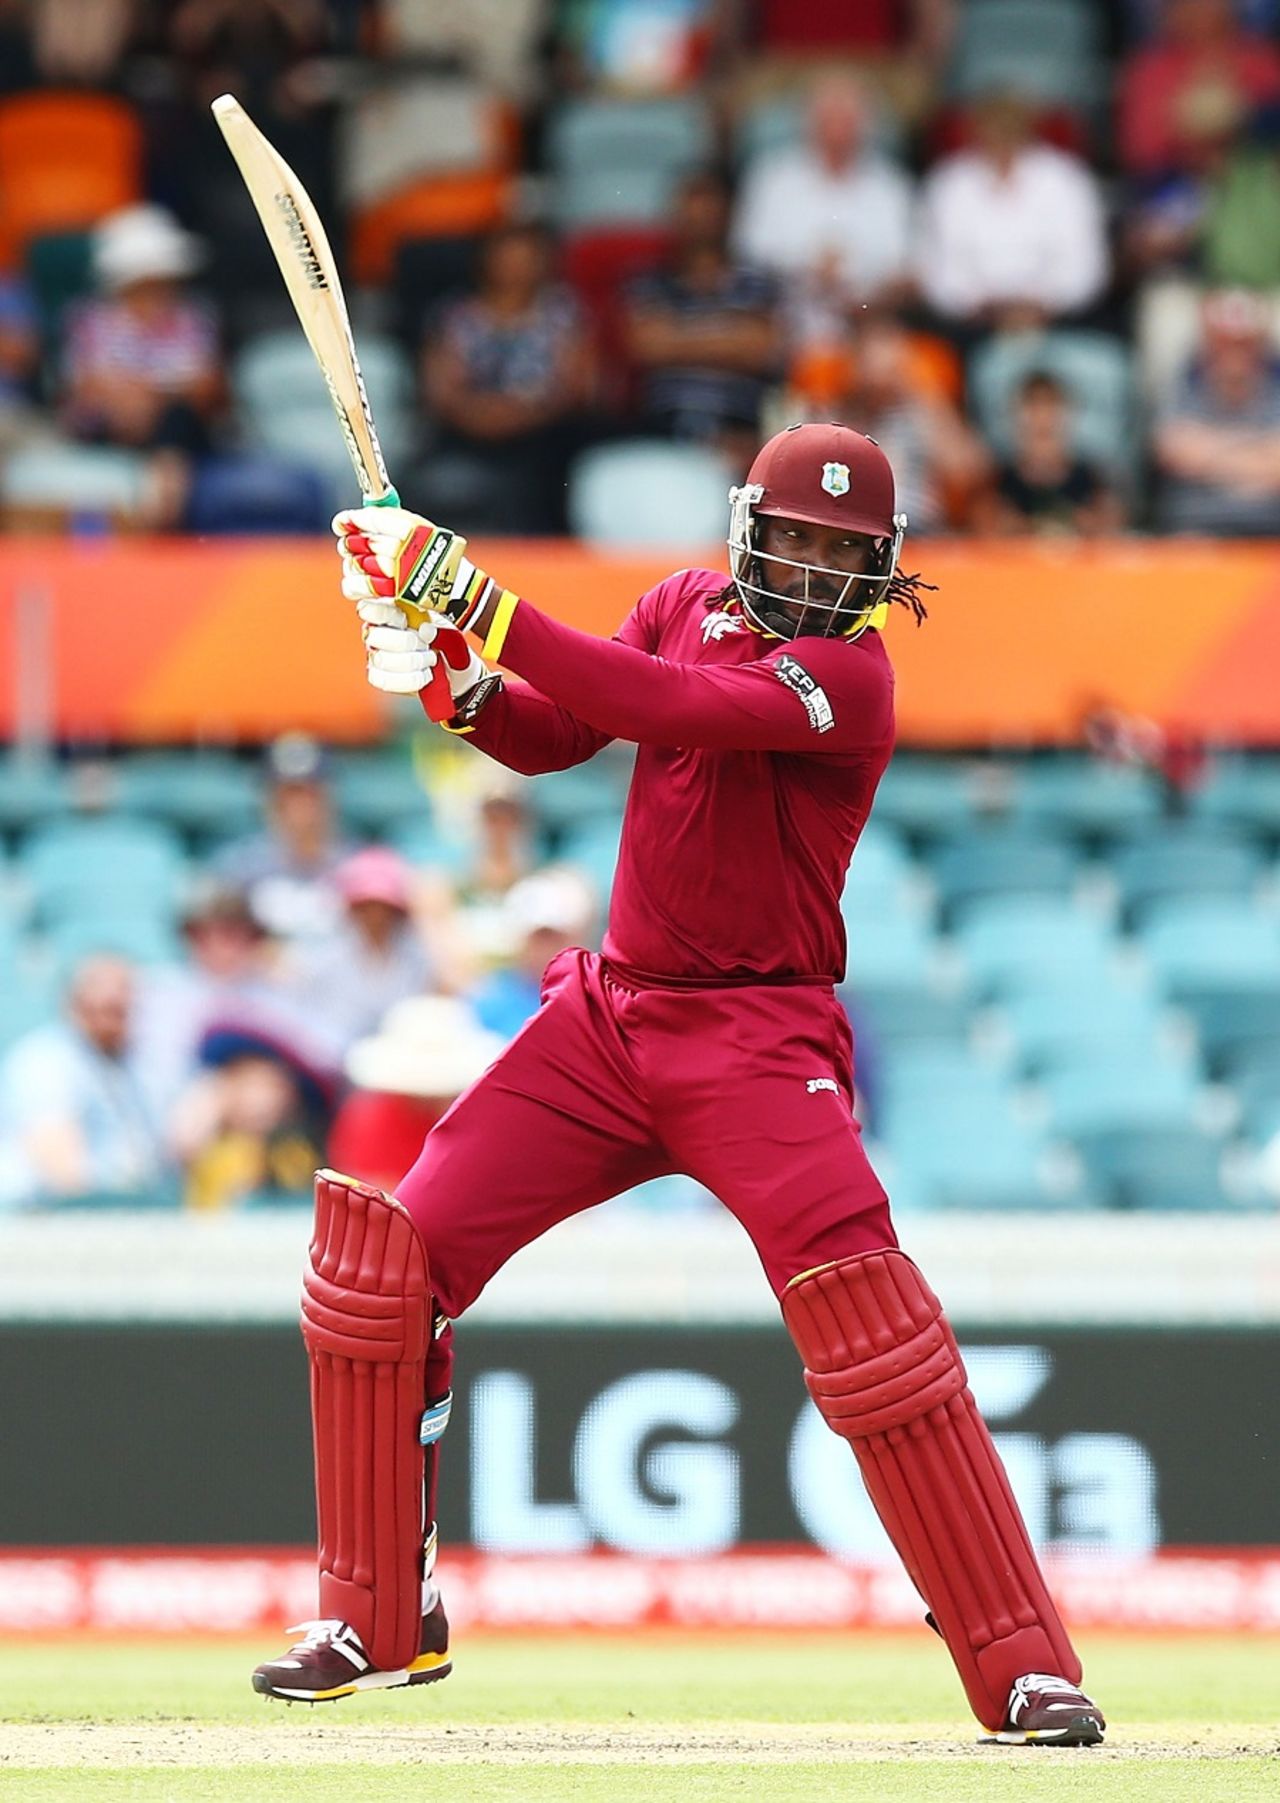 Chris Gayle flays one through the off side, West Indies v Zimbabwe, World Cup 2015, Group B, Canberra, February 24, 2015